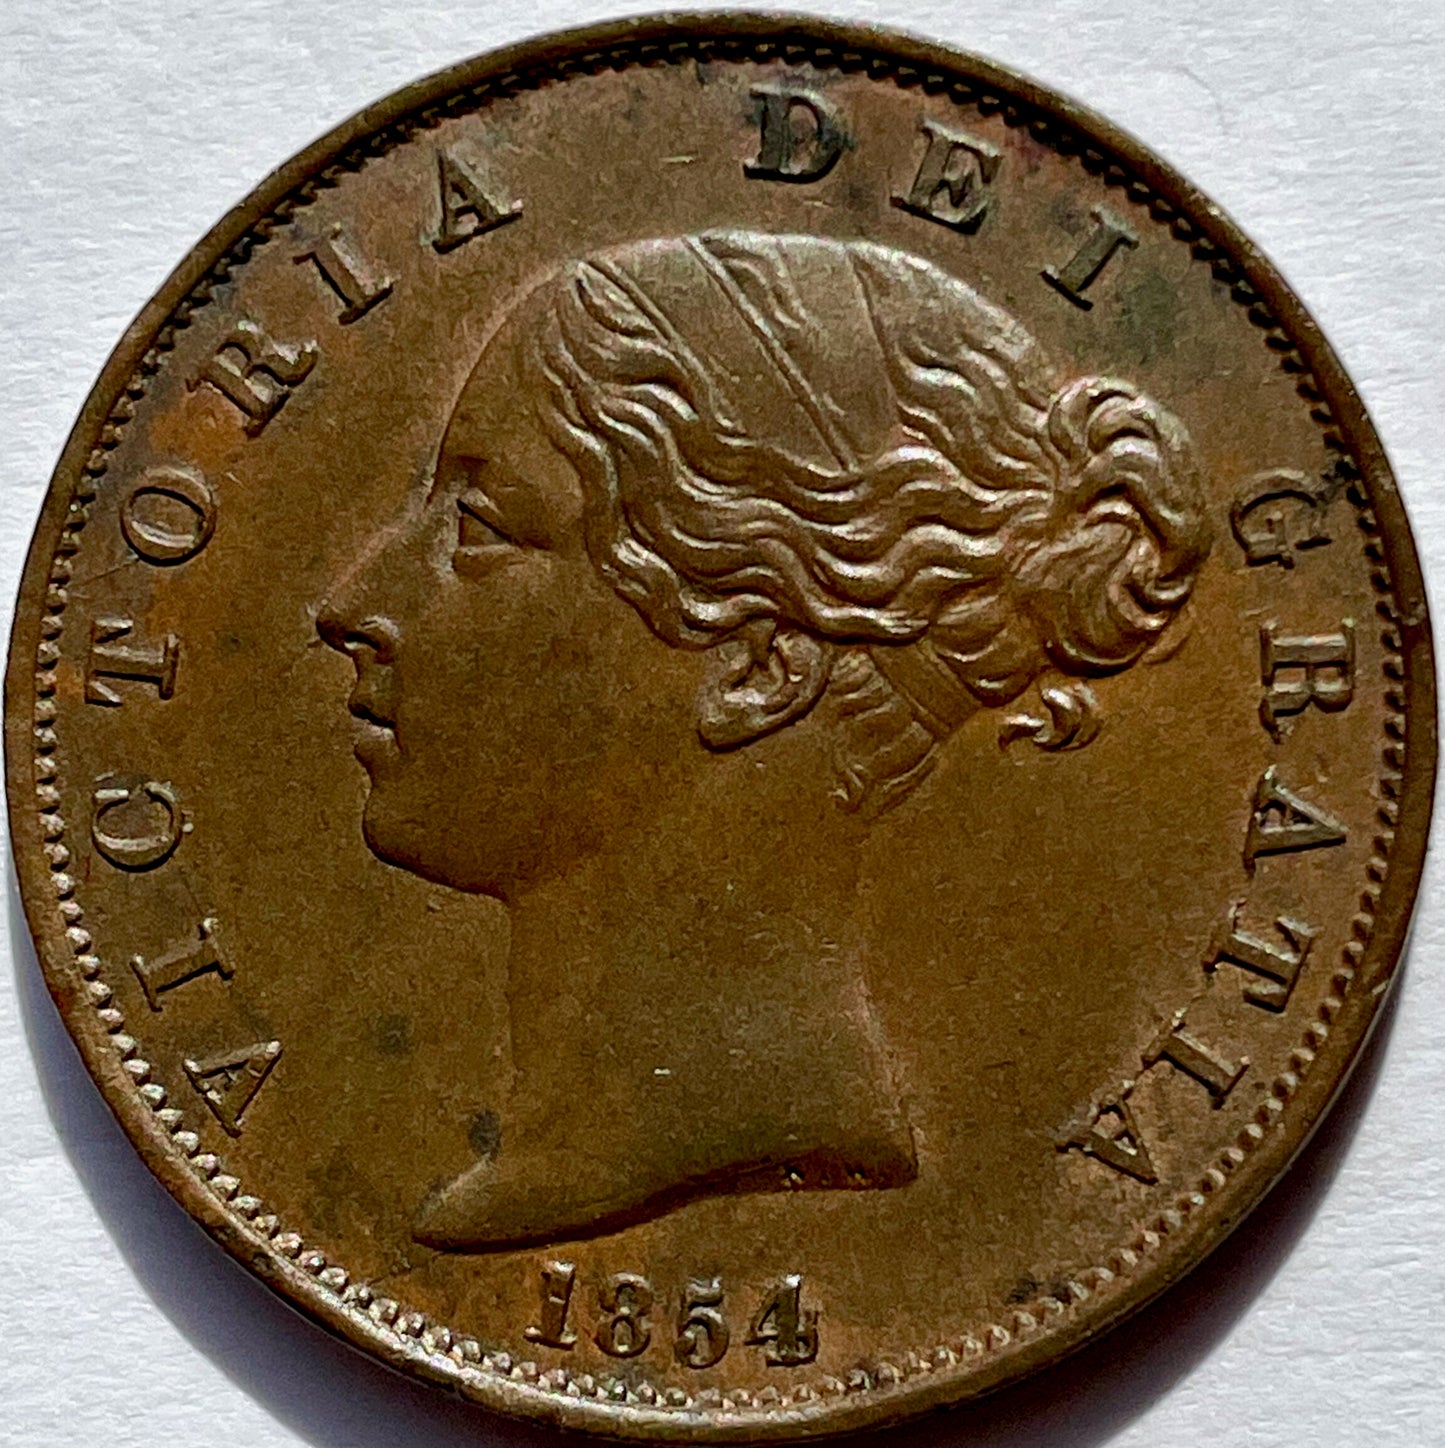 1854 Halfpenny S3949 BMC 1542 Upturned A for V in VICTORIA GEF